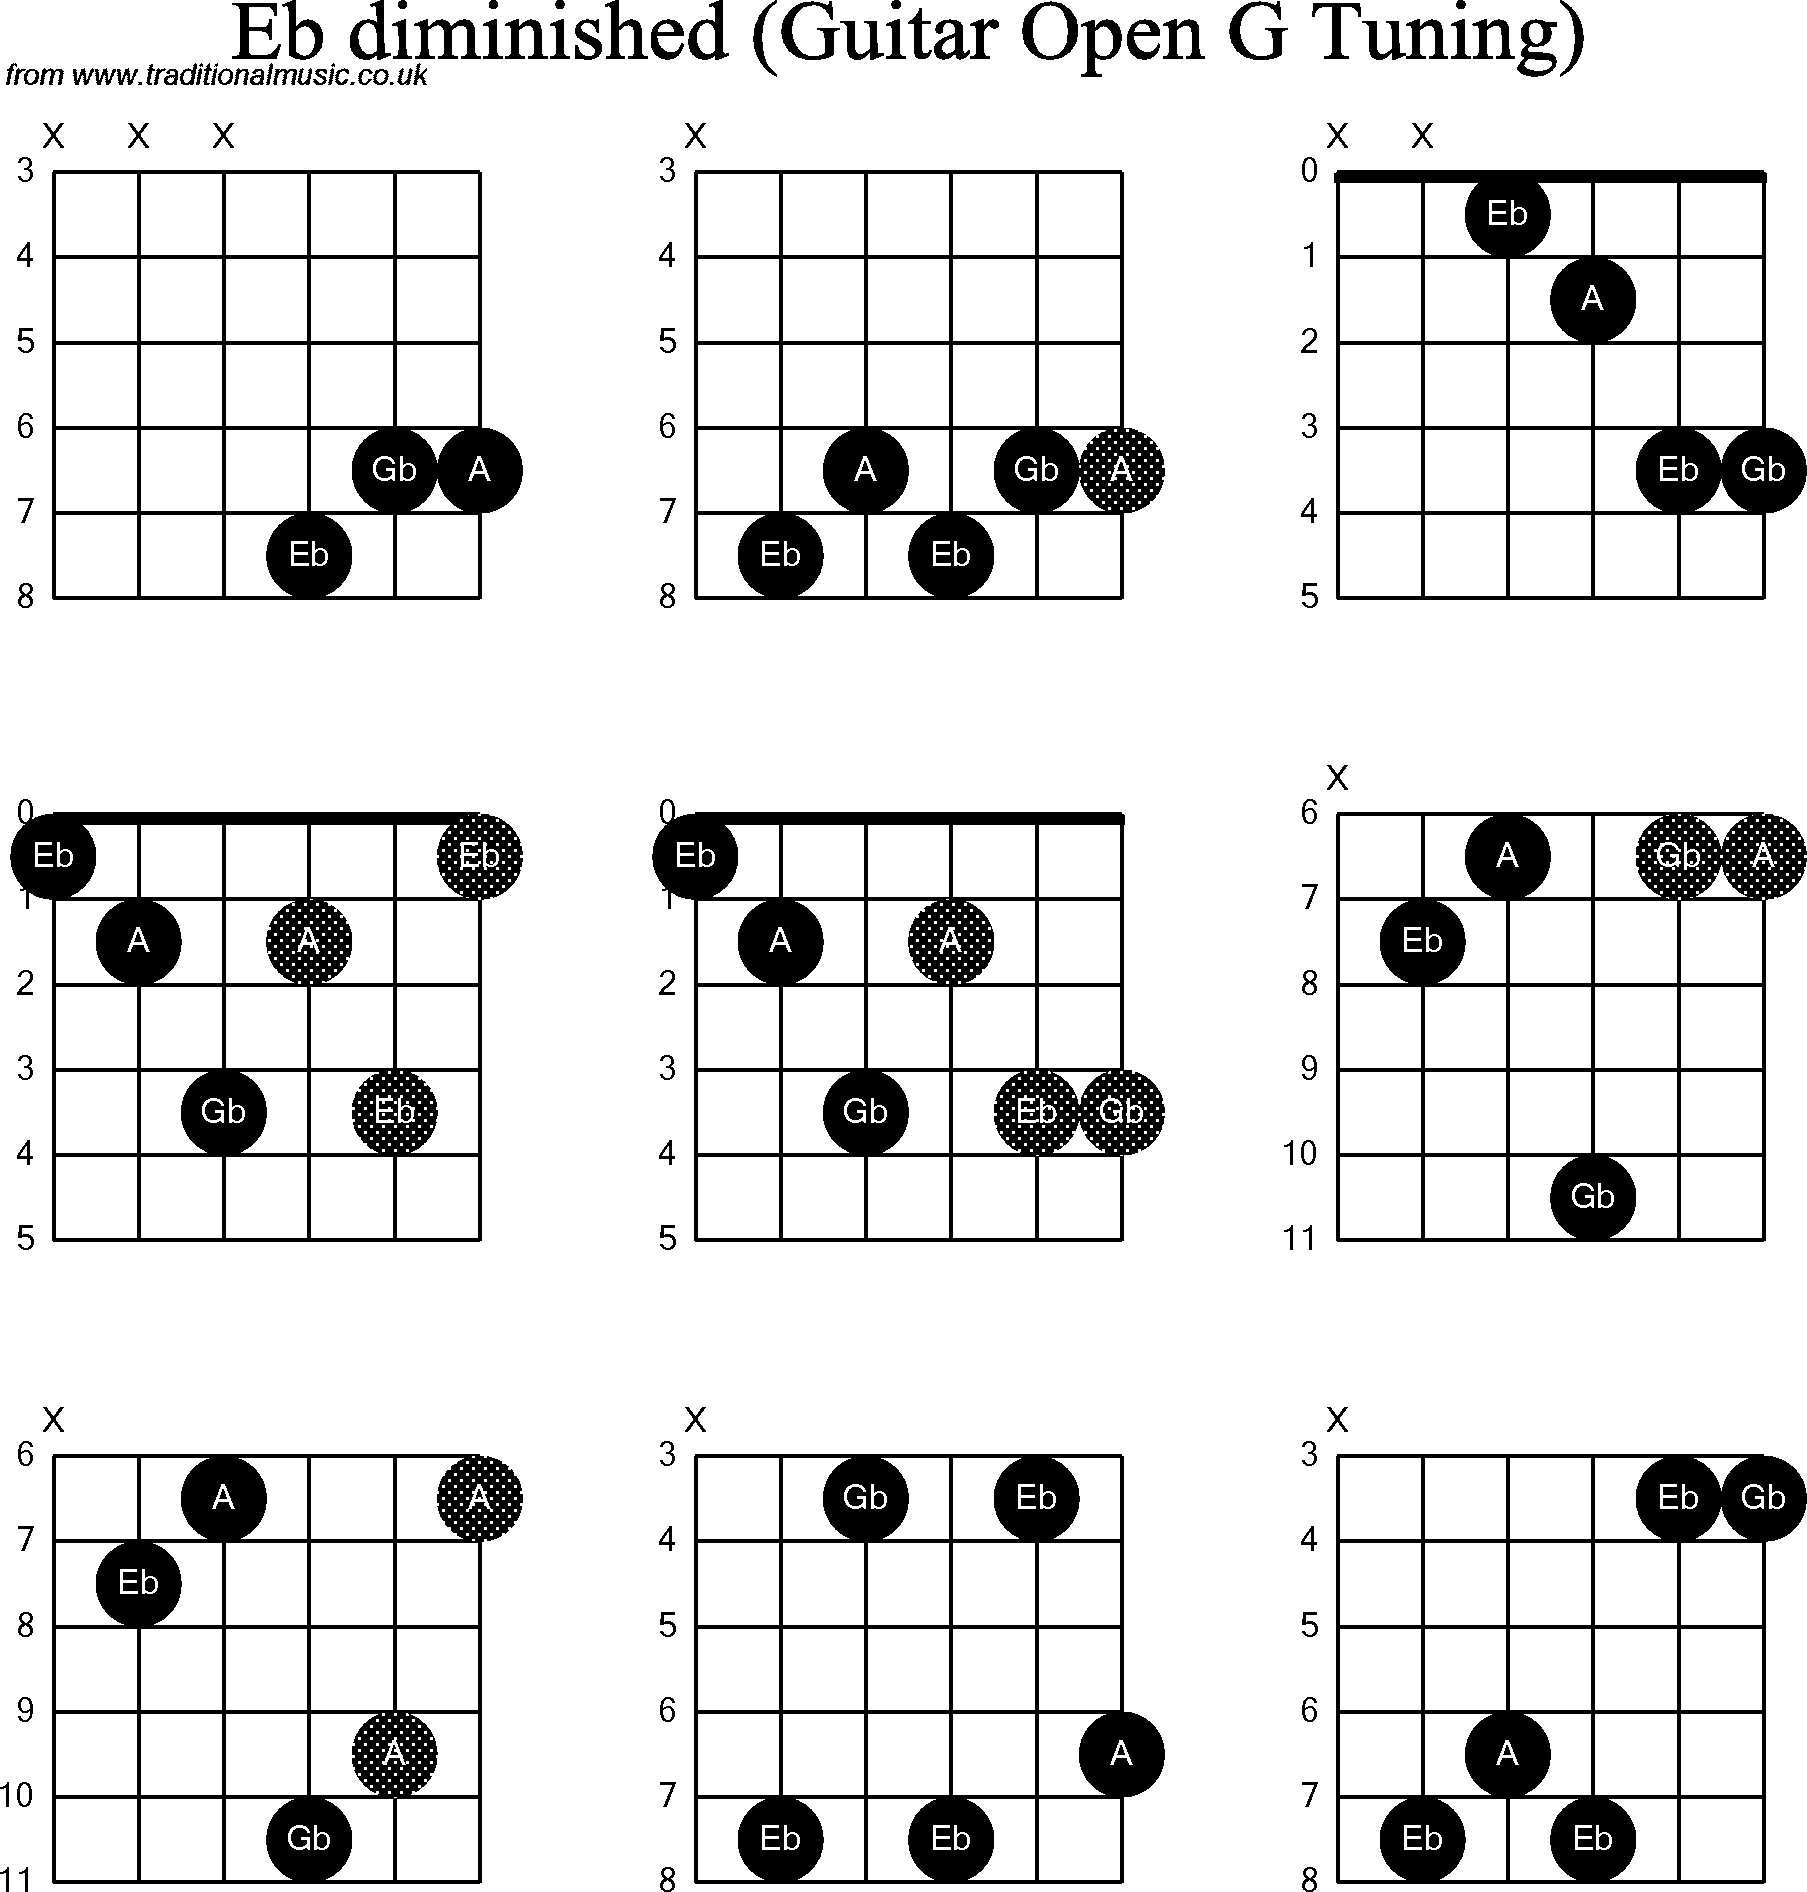 Chord diagrams for Dobro Eb Diminished